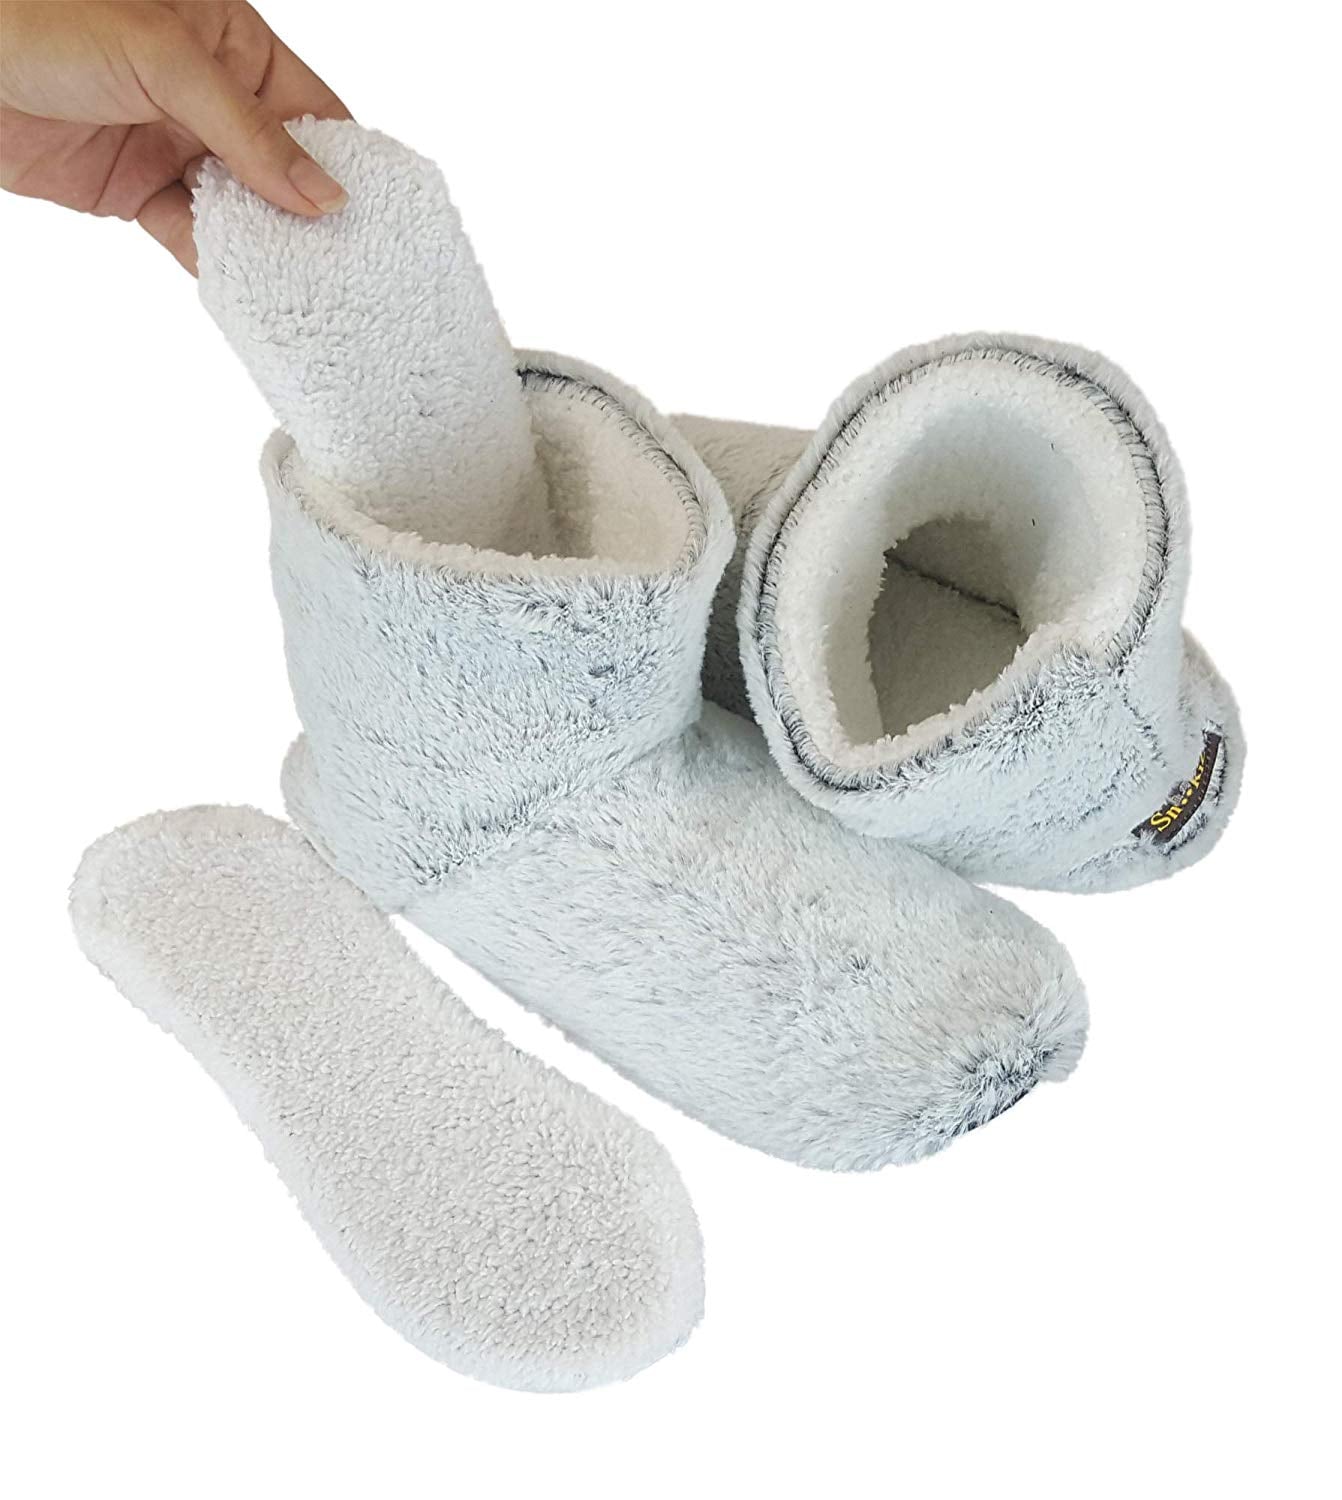 warming slippers